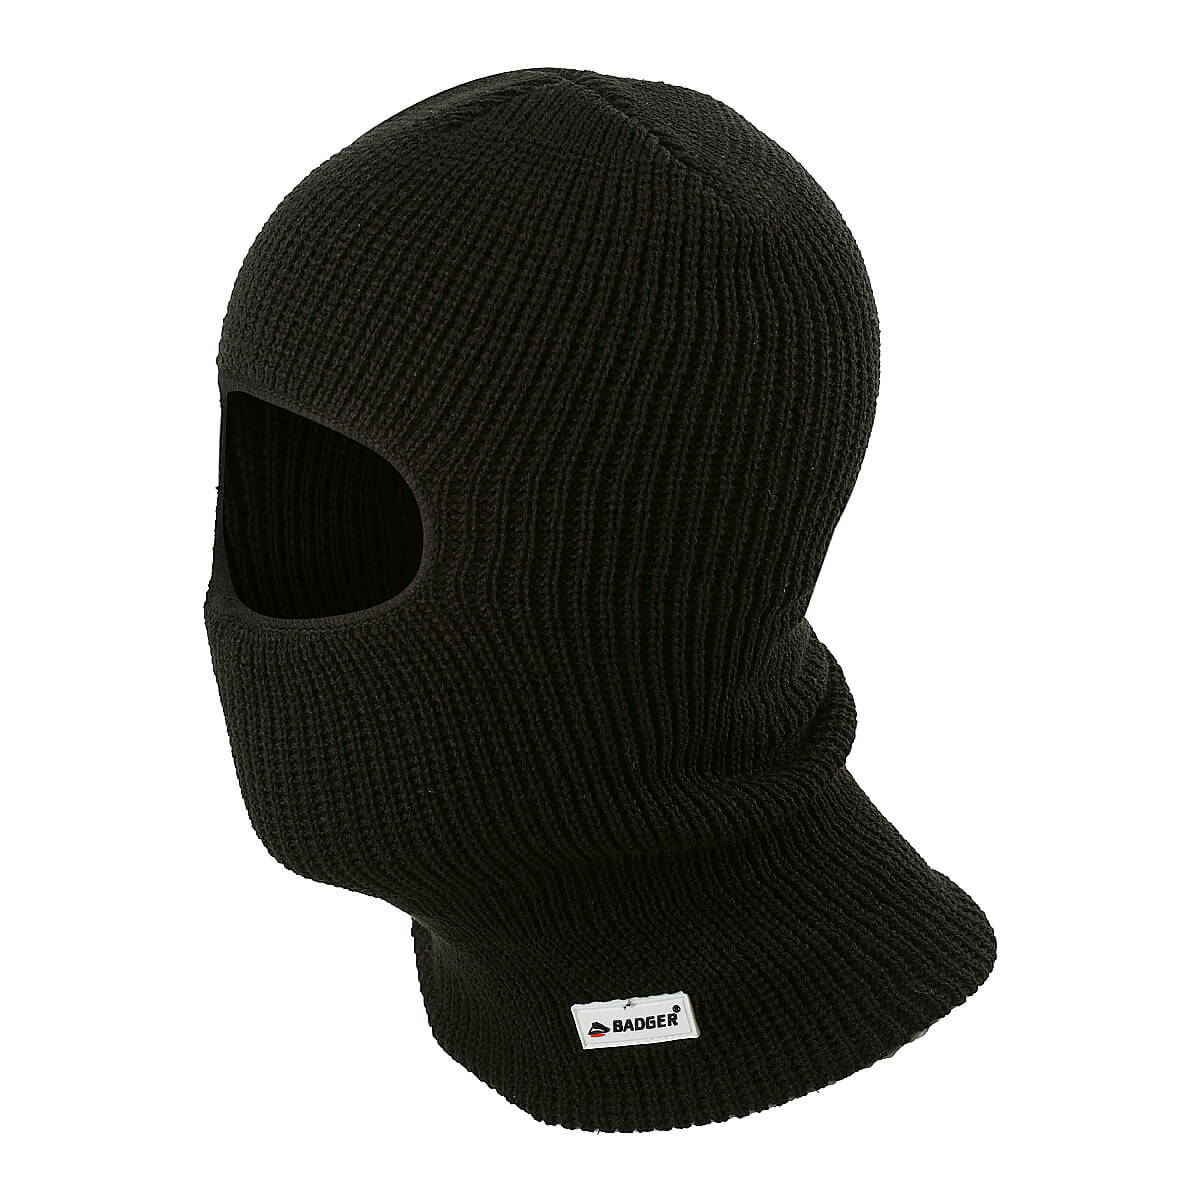 BADGER FH92L - Double Knit Thermal Balaclava - Allens Industrial Products